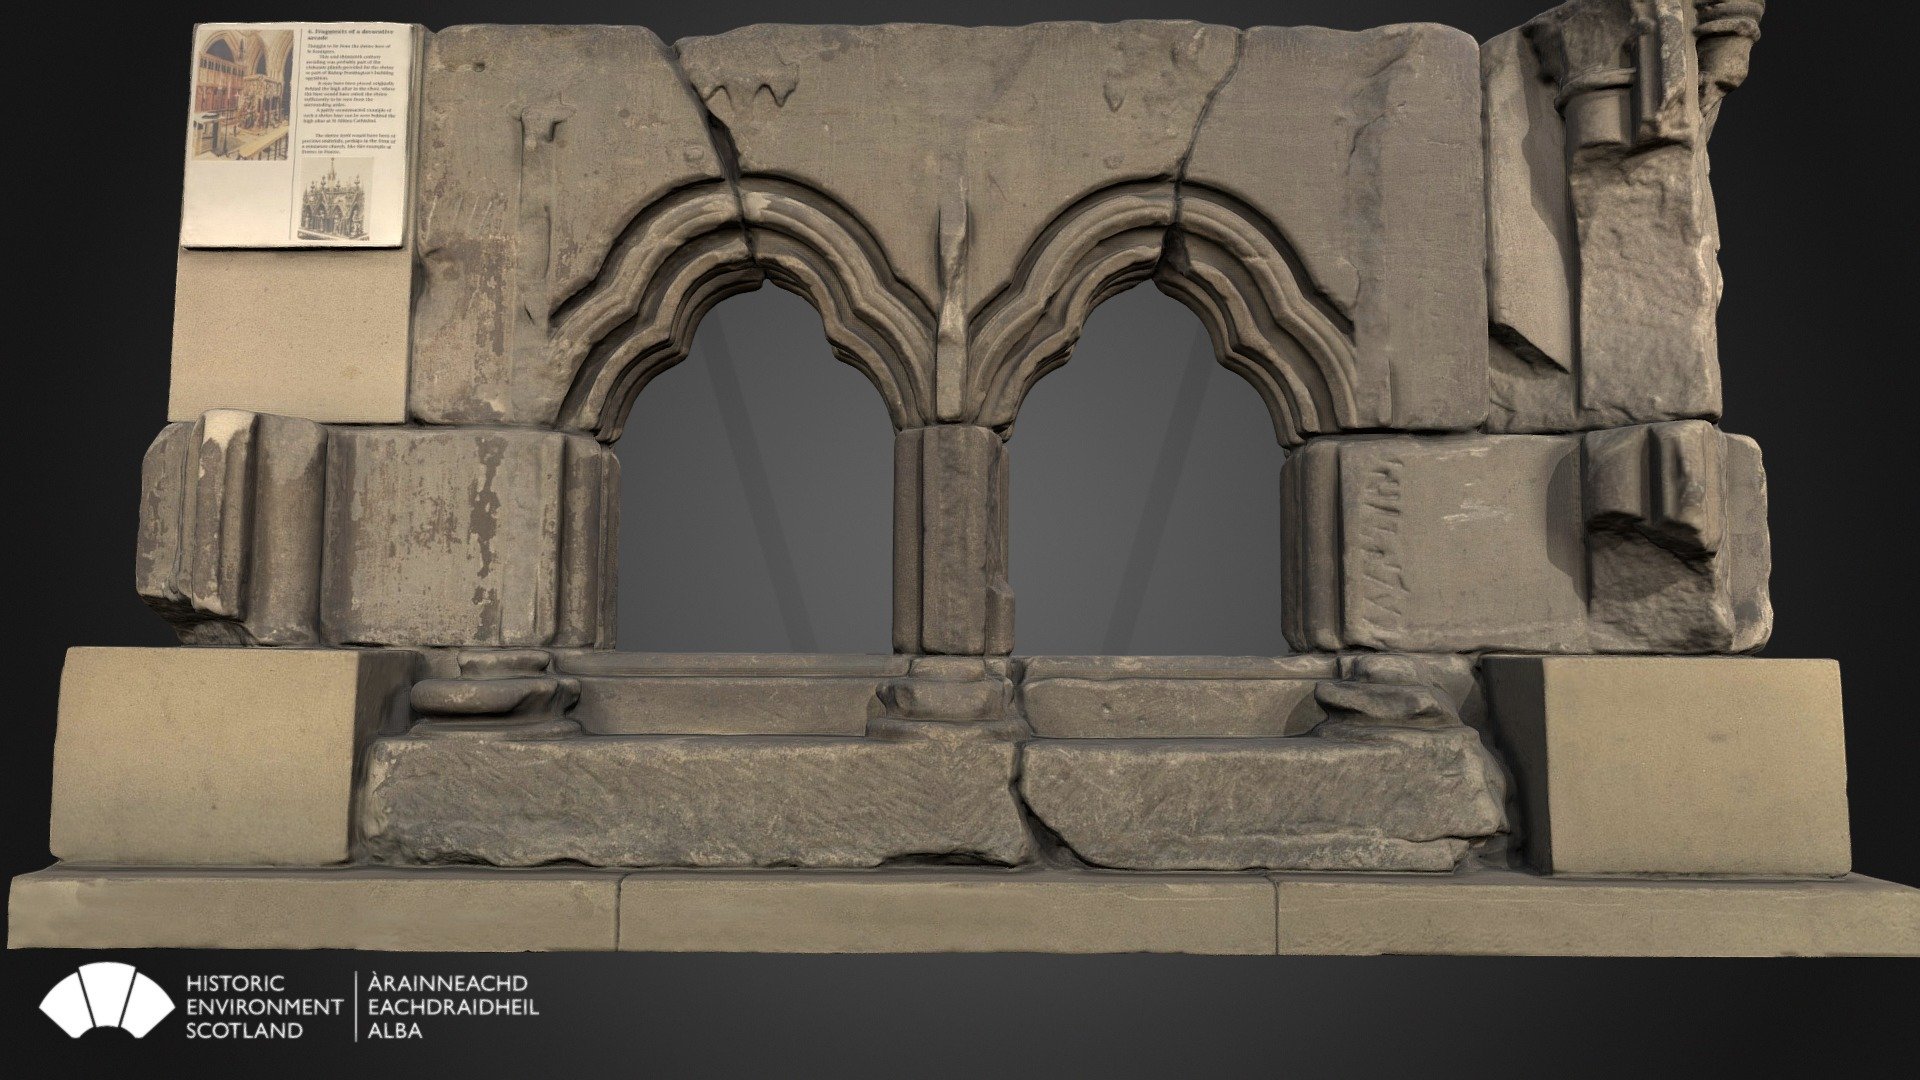 These arches once formed the base of a tomb or shrine in the early medieval church that is now part of Glasgow Cathedral. 

It may have been associated with the shrine of St Kentigern, the first bishop within the ancient British kingdom of Strathclyde, who died in 614. 

Arched structures like this were sometimes used to enclose holy relics so passing pilgrims could see and venerate them.

For information on visiting Glasgow Cathedral, see our website. 

534 x 420 x 380mm

GLA/o/1a-i | Rae Project - Shrine Base, Glasgow Cathedral - 3D model by Historic Environment Scotland (@HistoricEnvironmentScotland) 3d model